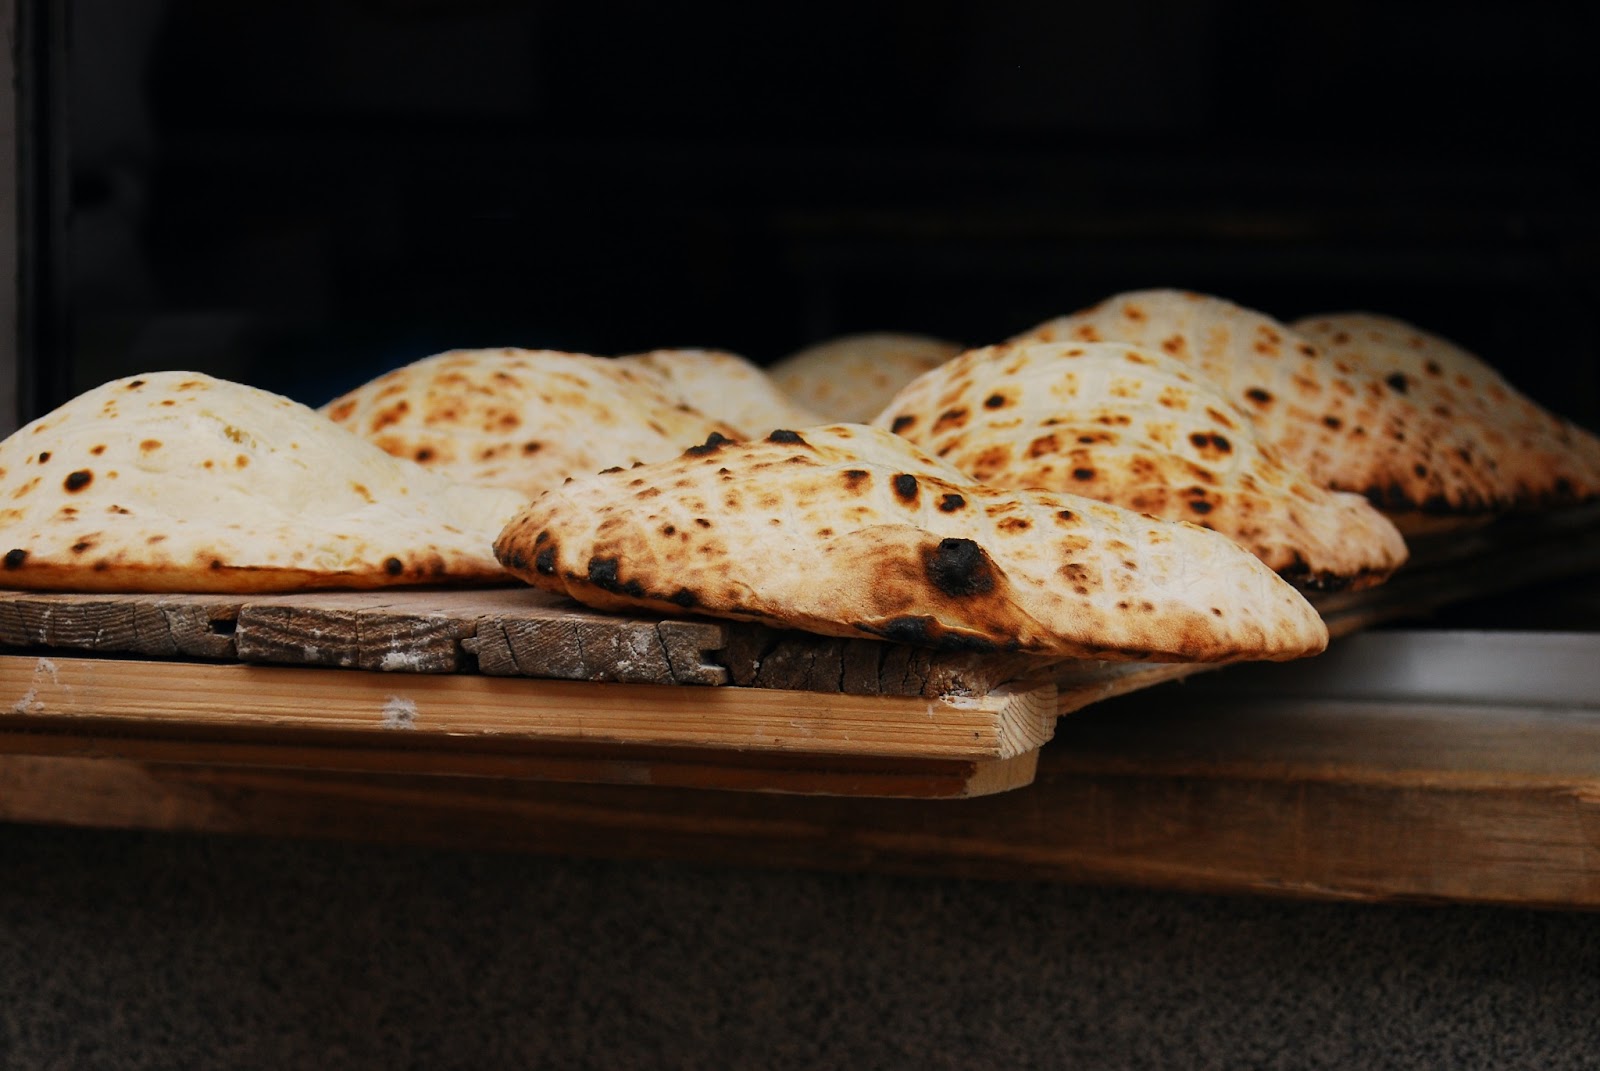 Casabe, a flatbread made from yucca, sometimes served with mambá, a savory peanut butter—a Dominican delicacy.